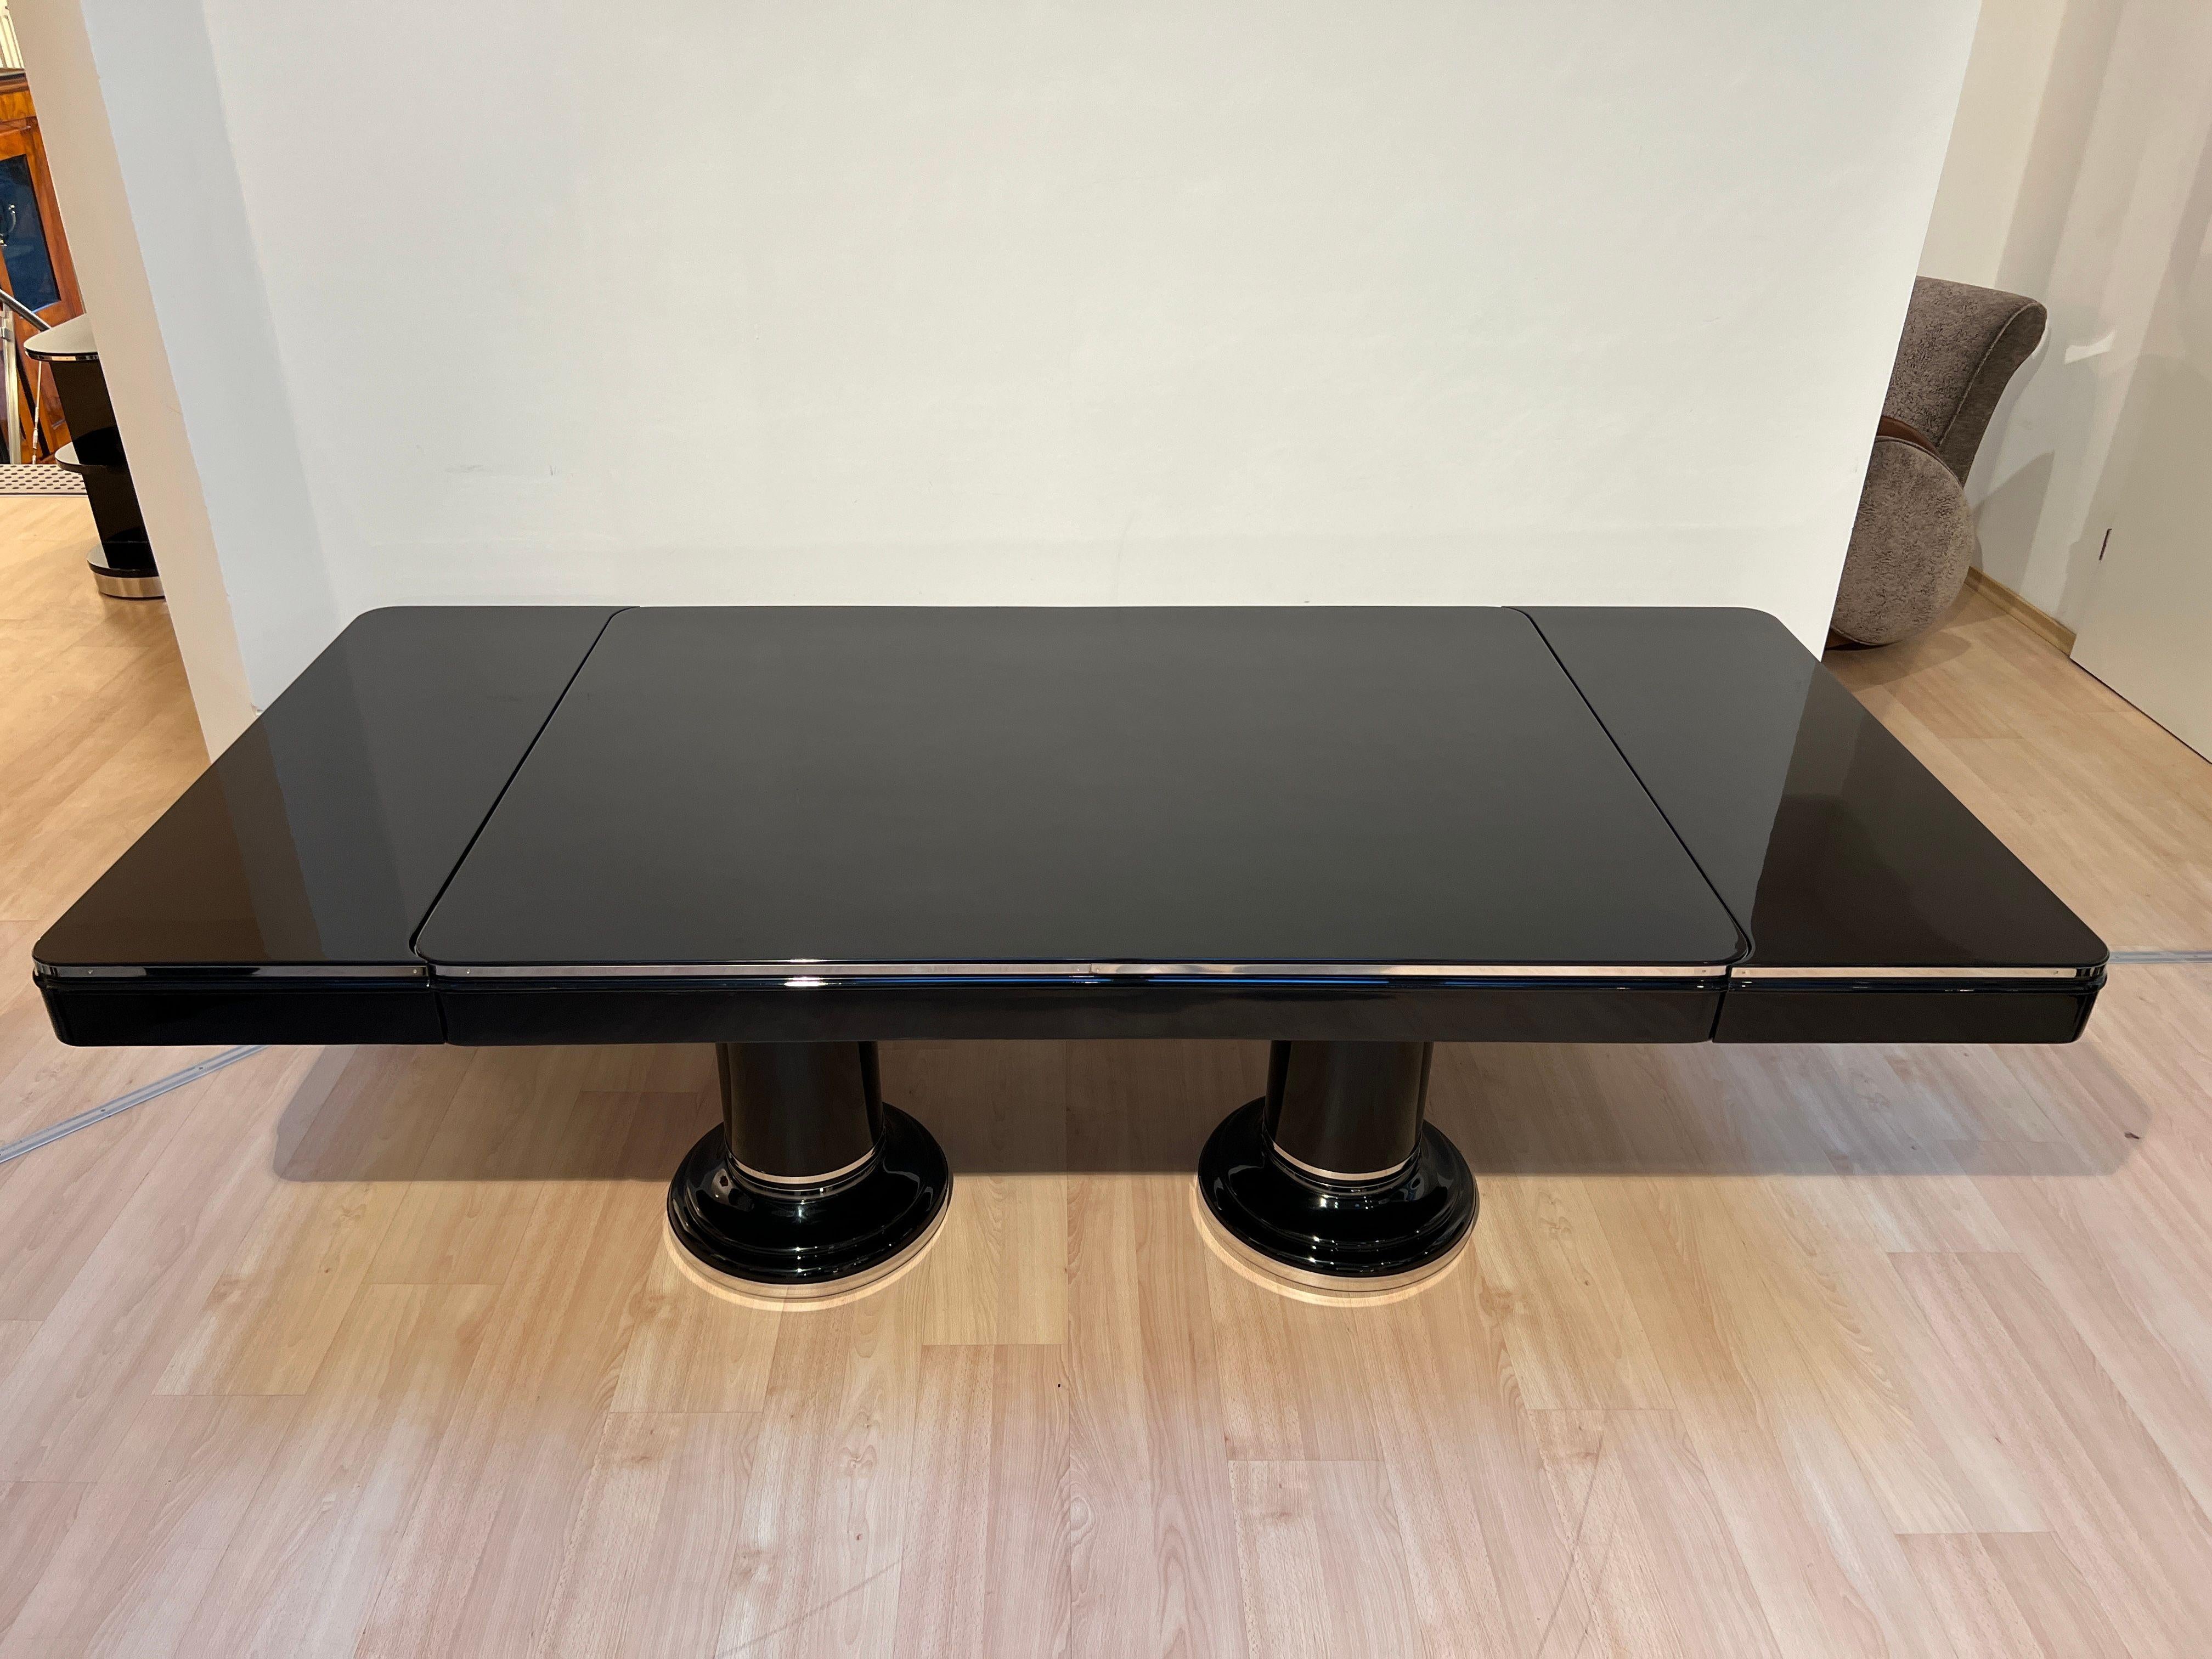 Polished Art Deco Expandable Table, Black Lacquer, Stainless Steel, France circa 1930